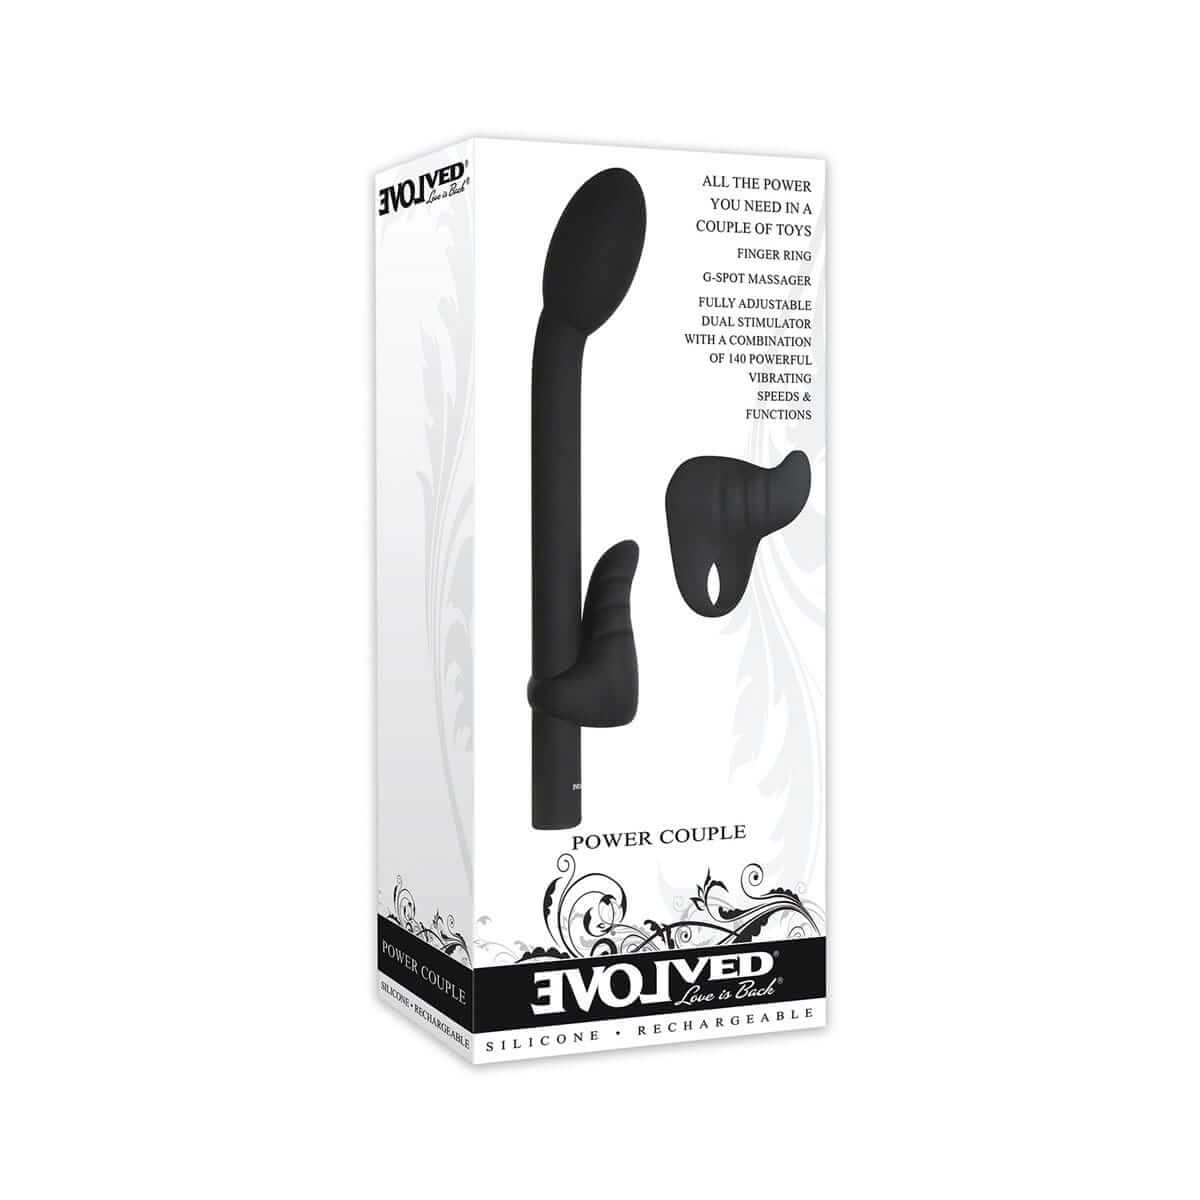 Power Couple G-spot & Clit Stimulator - Thorn & Feather Sex Toy Canada